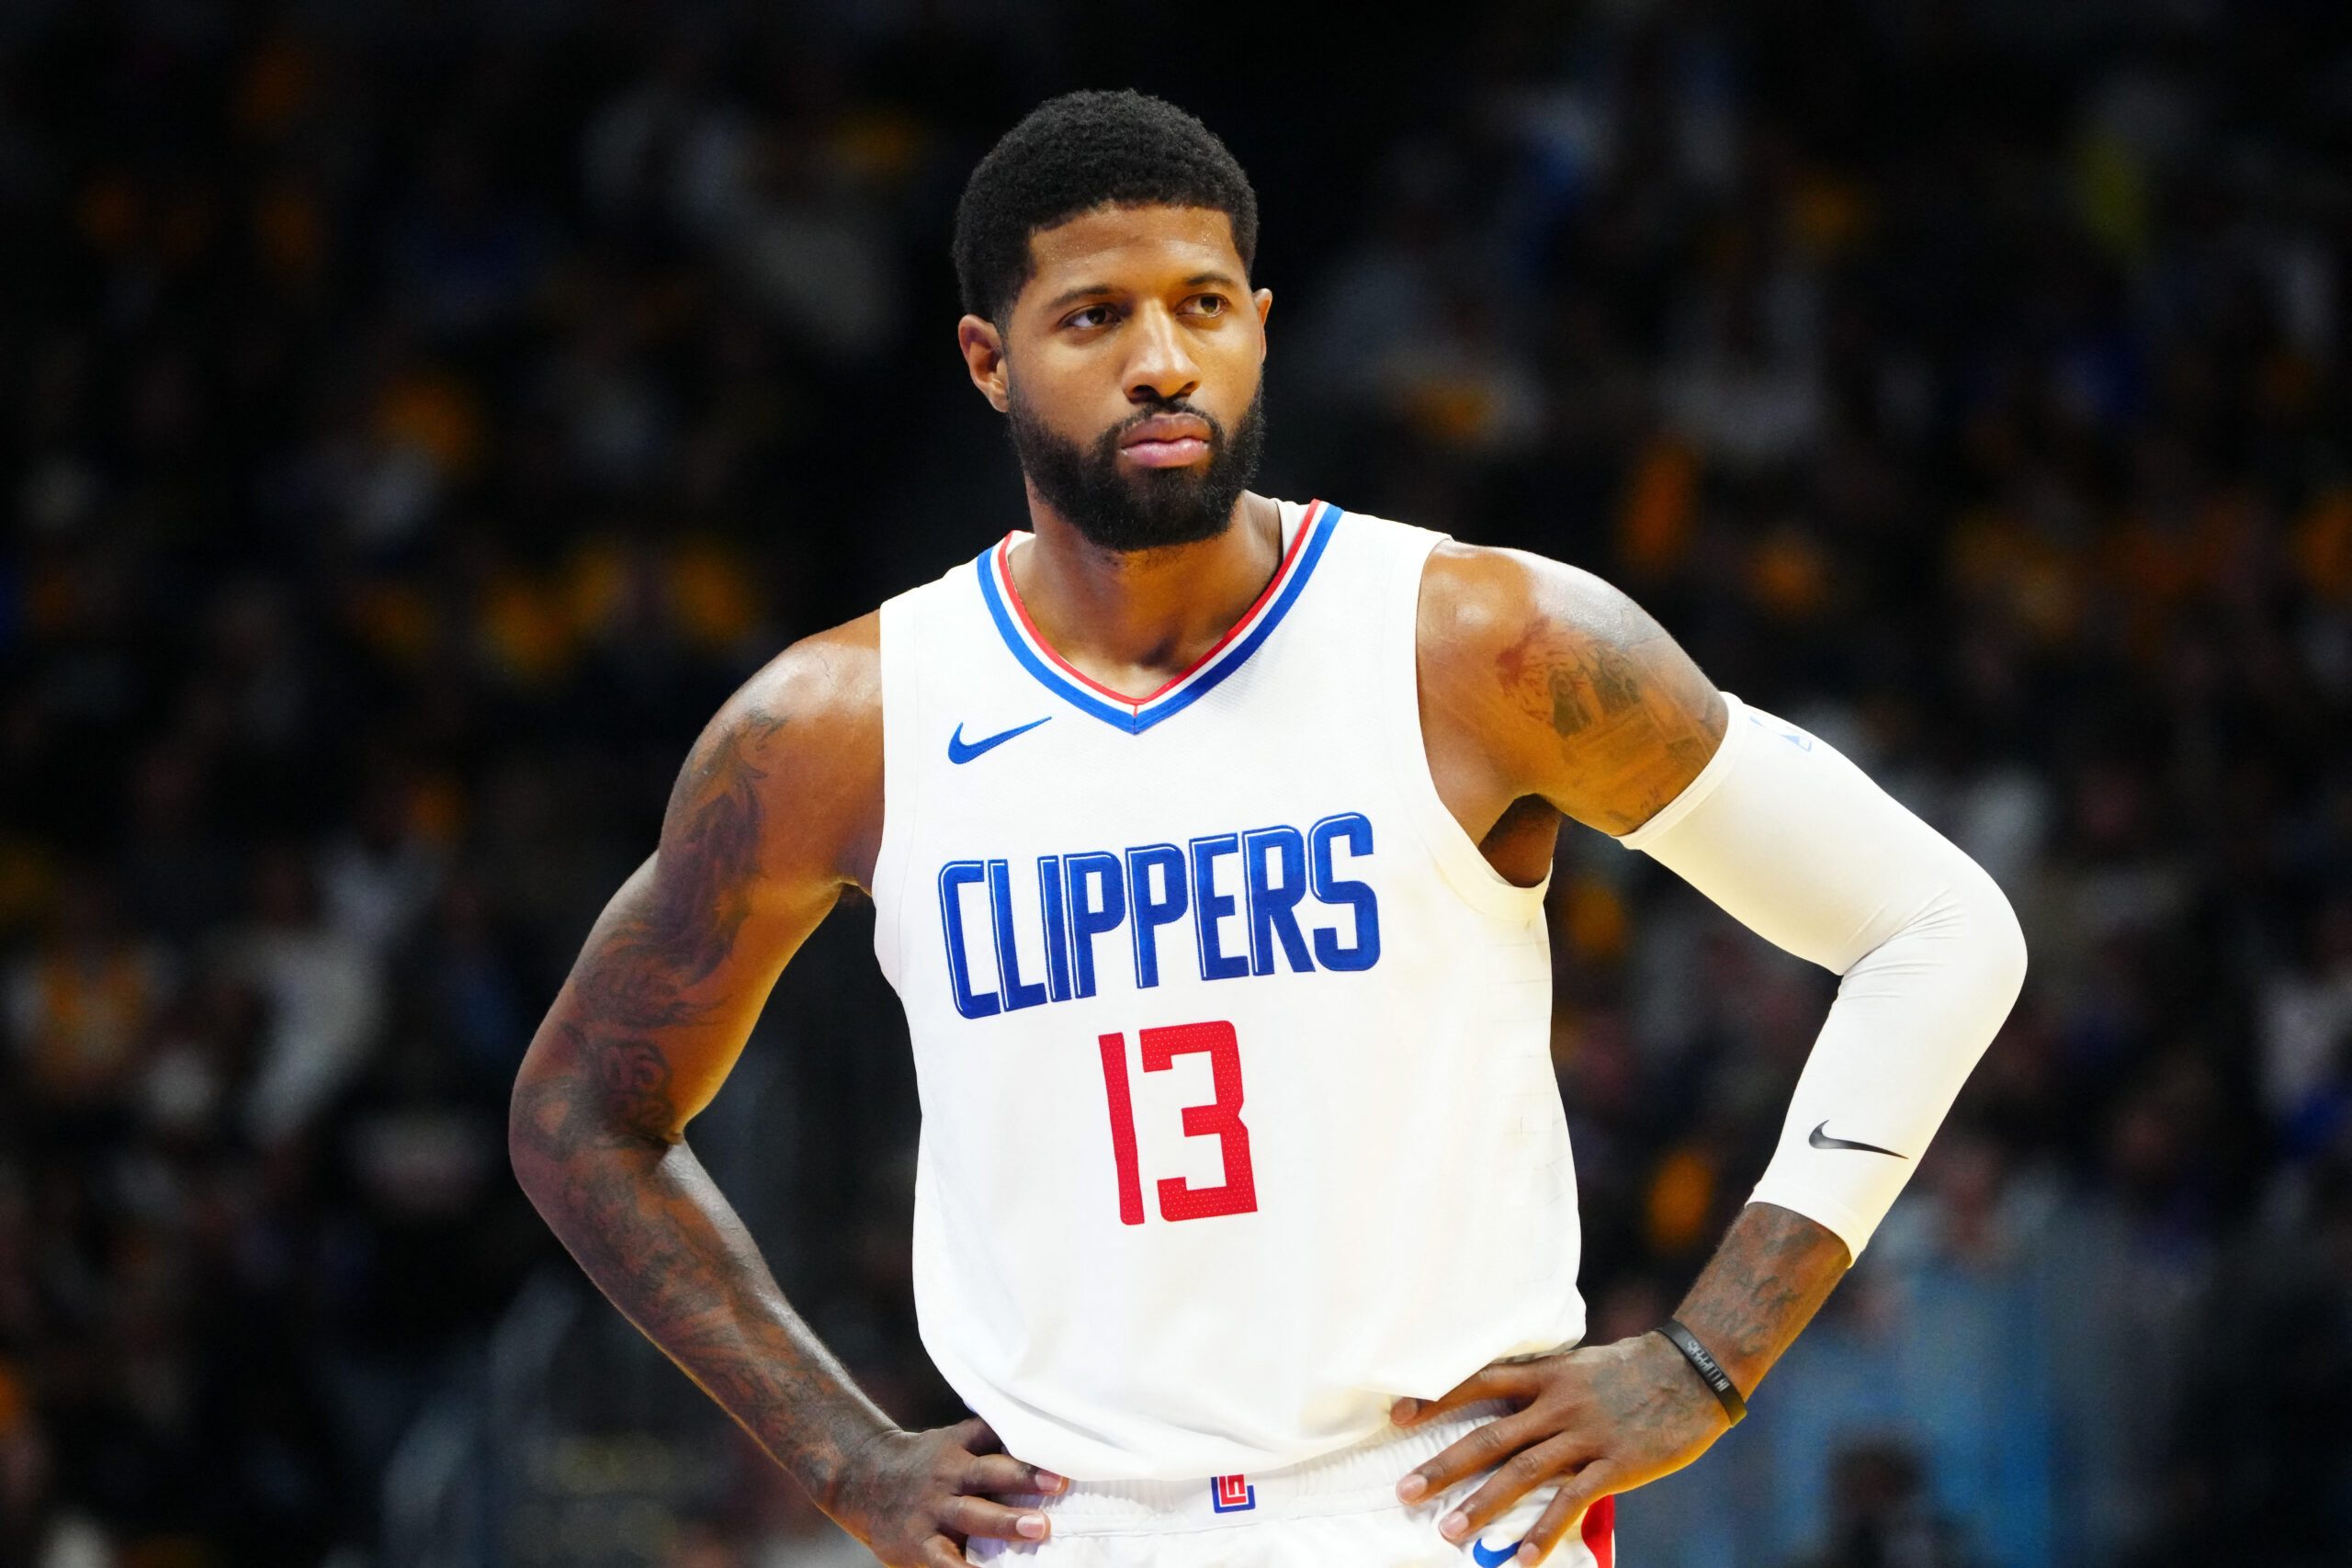 Clippers’ Paul George declines option, becomes free agent – report